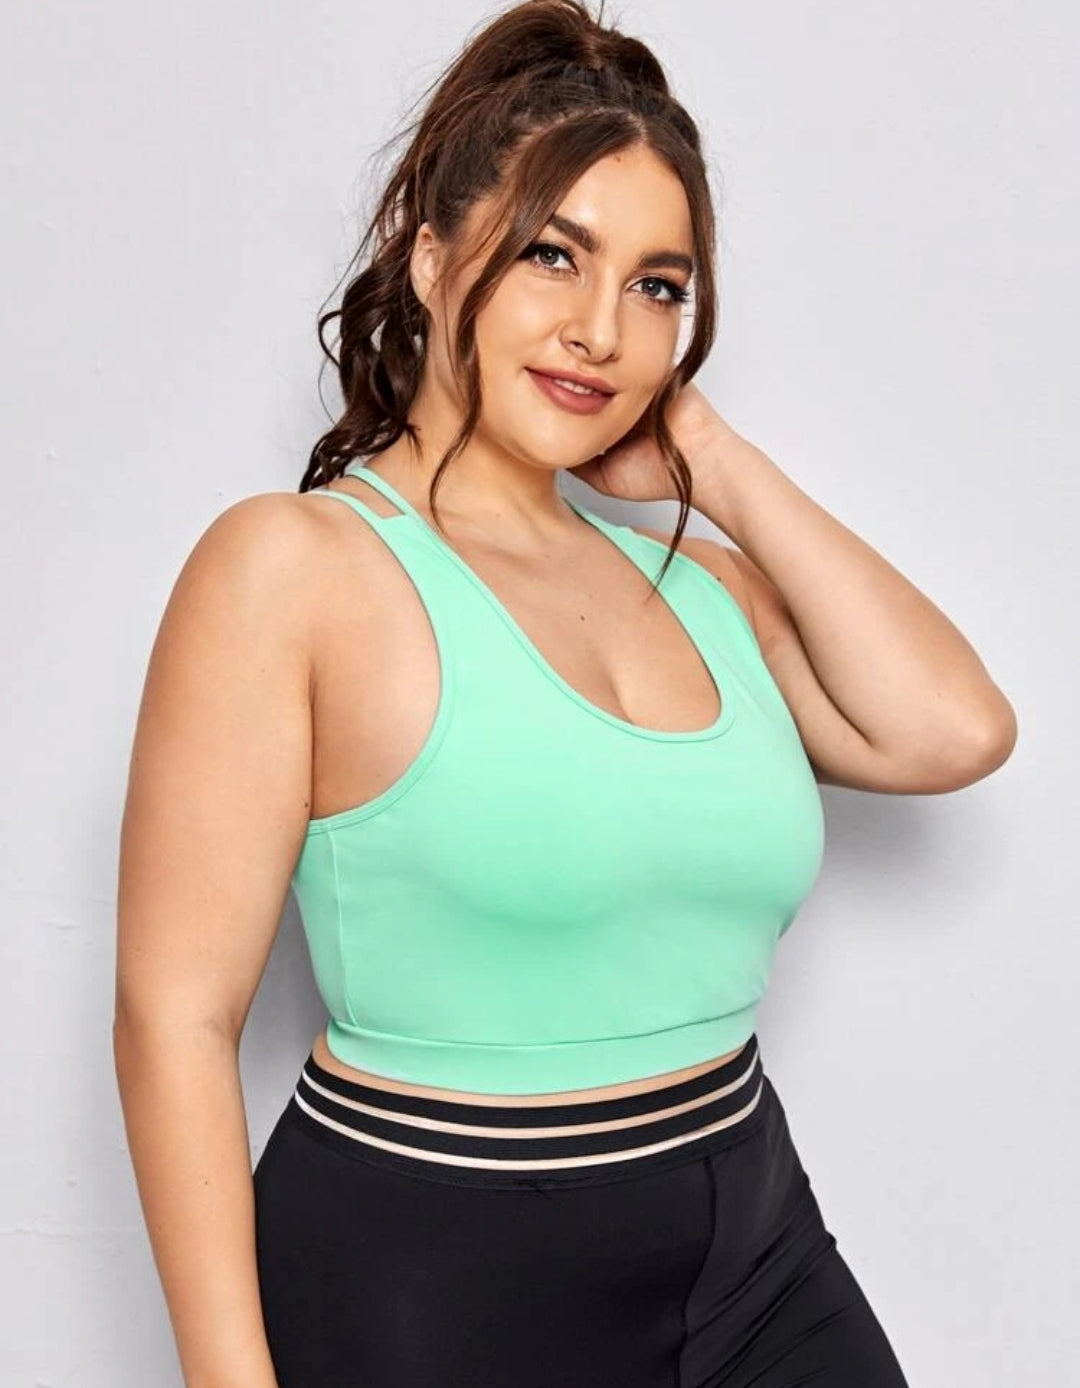 Criss Cross Medium Support Crop Top with a bright green color and a classic scoop neck, it's the perfect balance of secured support and daring style.